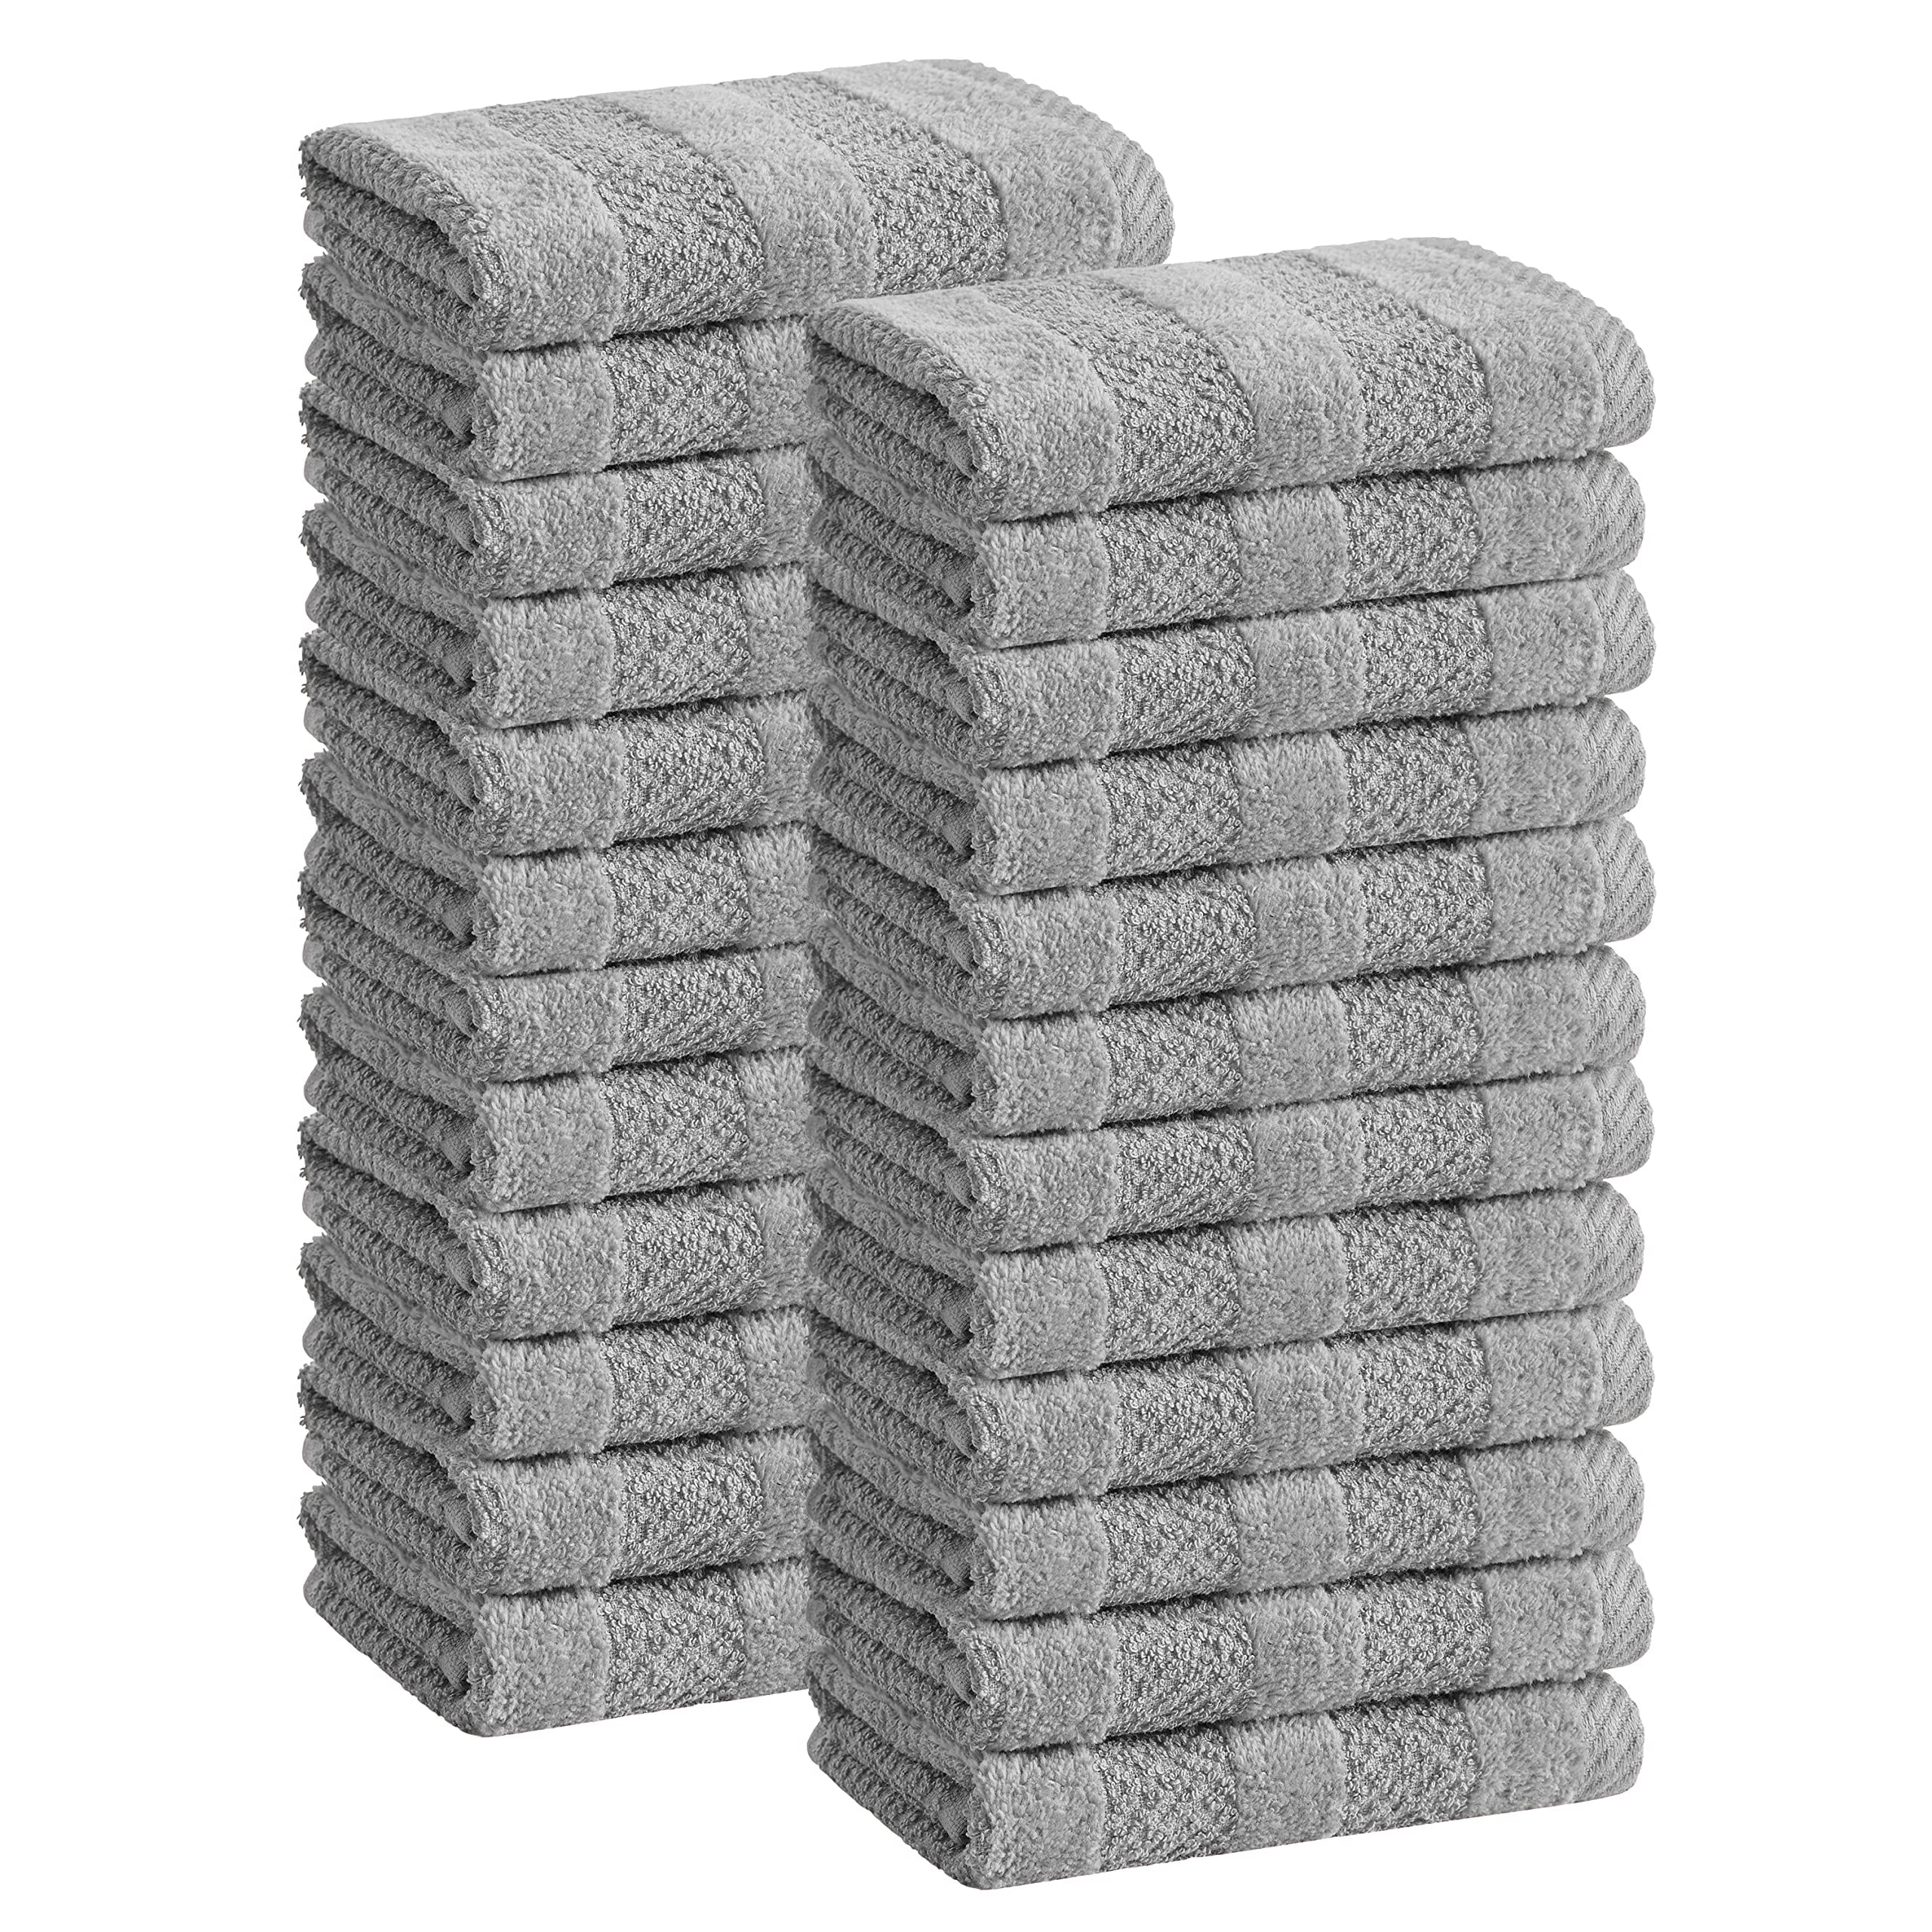 Cannon Shear Bliss Quick Dry Cotton 12 Piece Washcloth Set